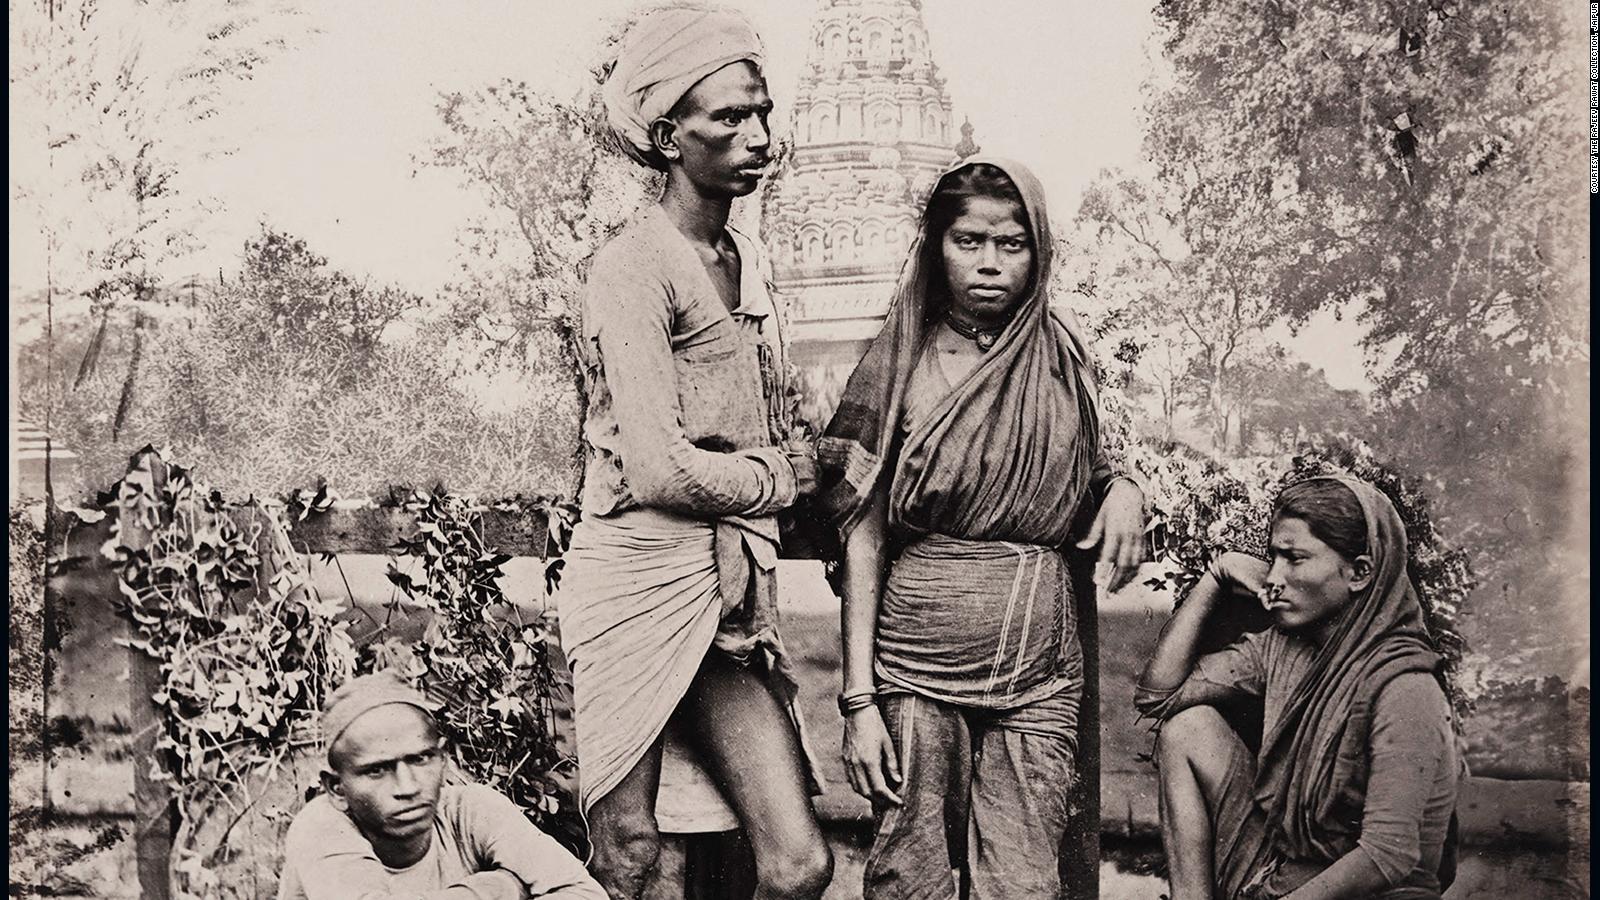 India photography: What these rare image tell us about